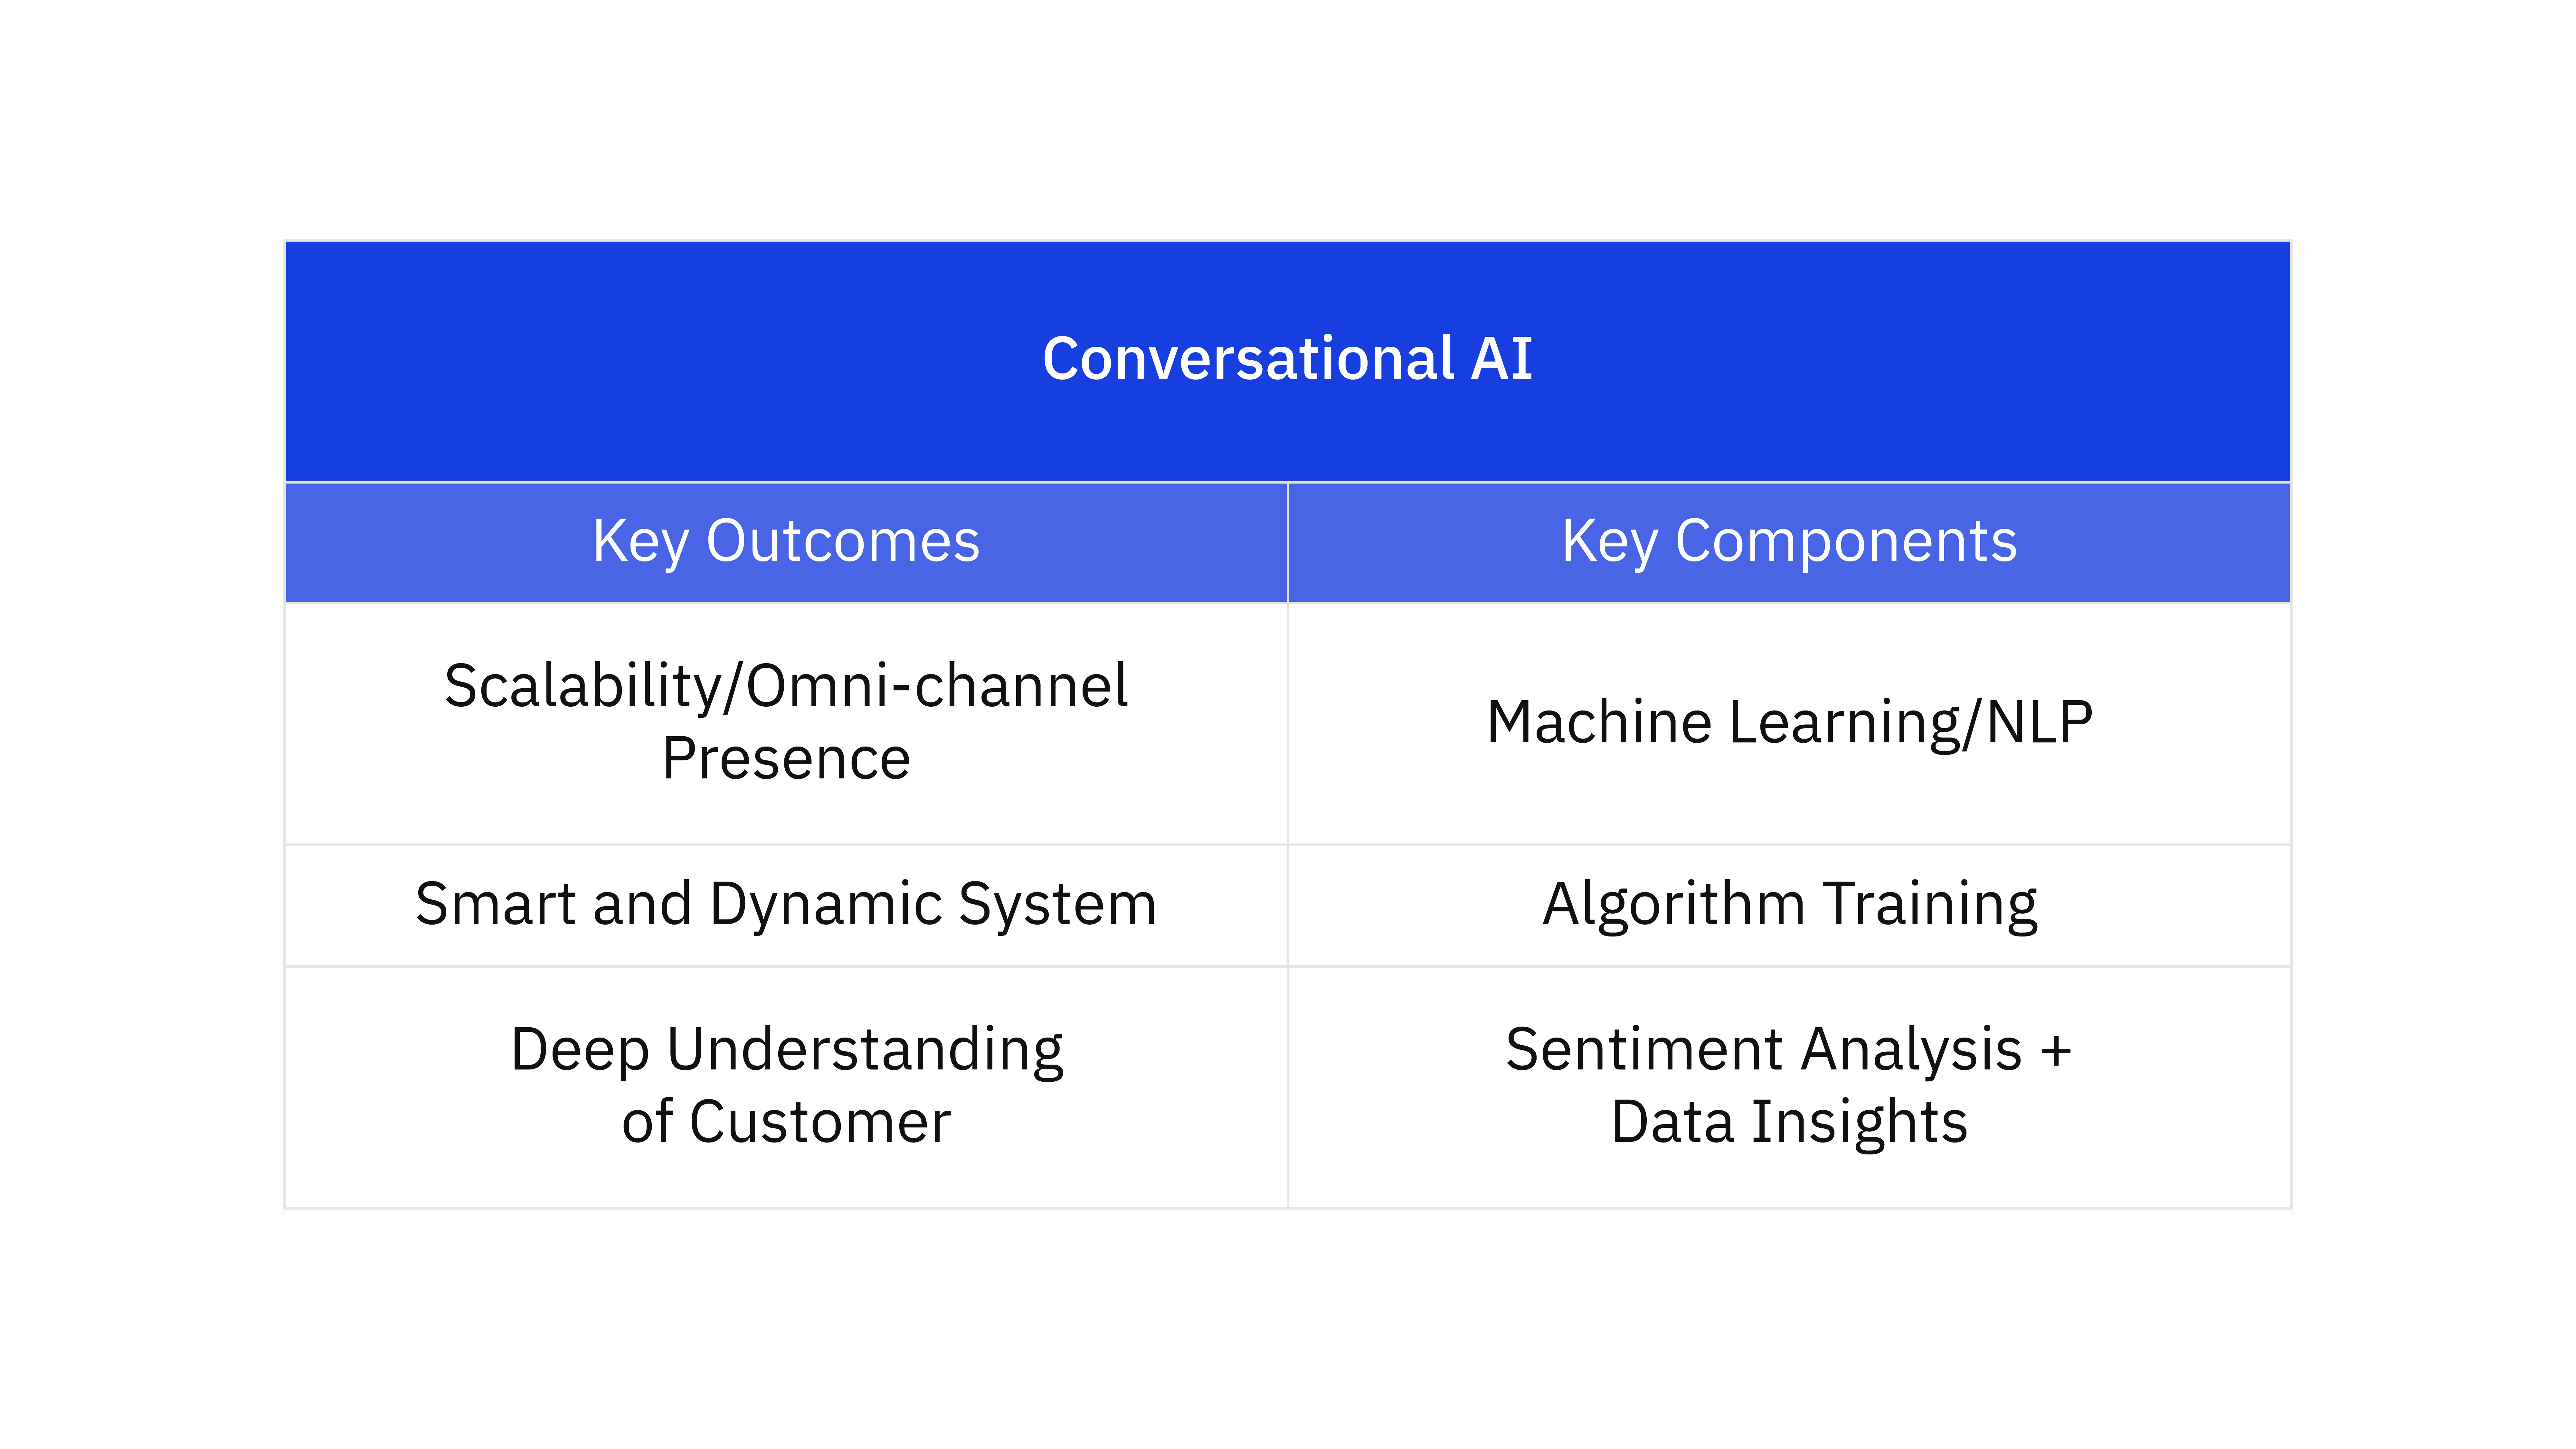 Conversational AI - key outcomes and components